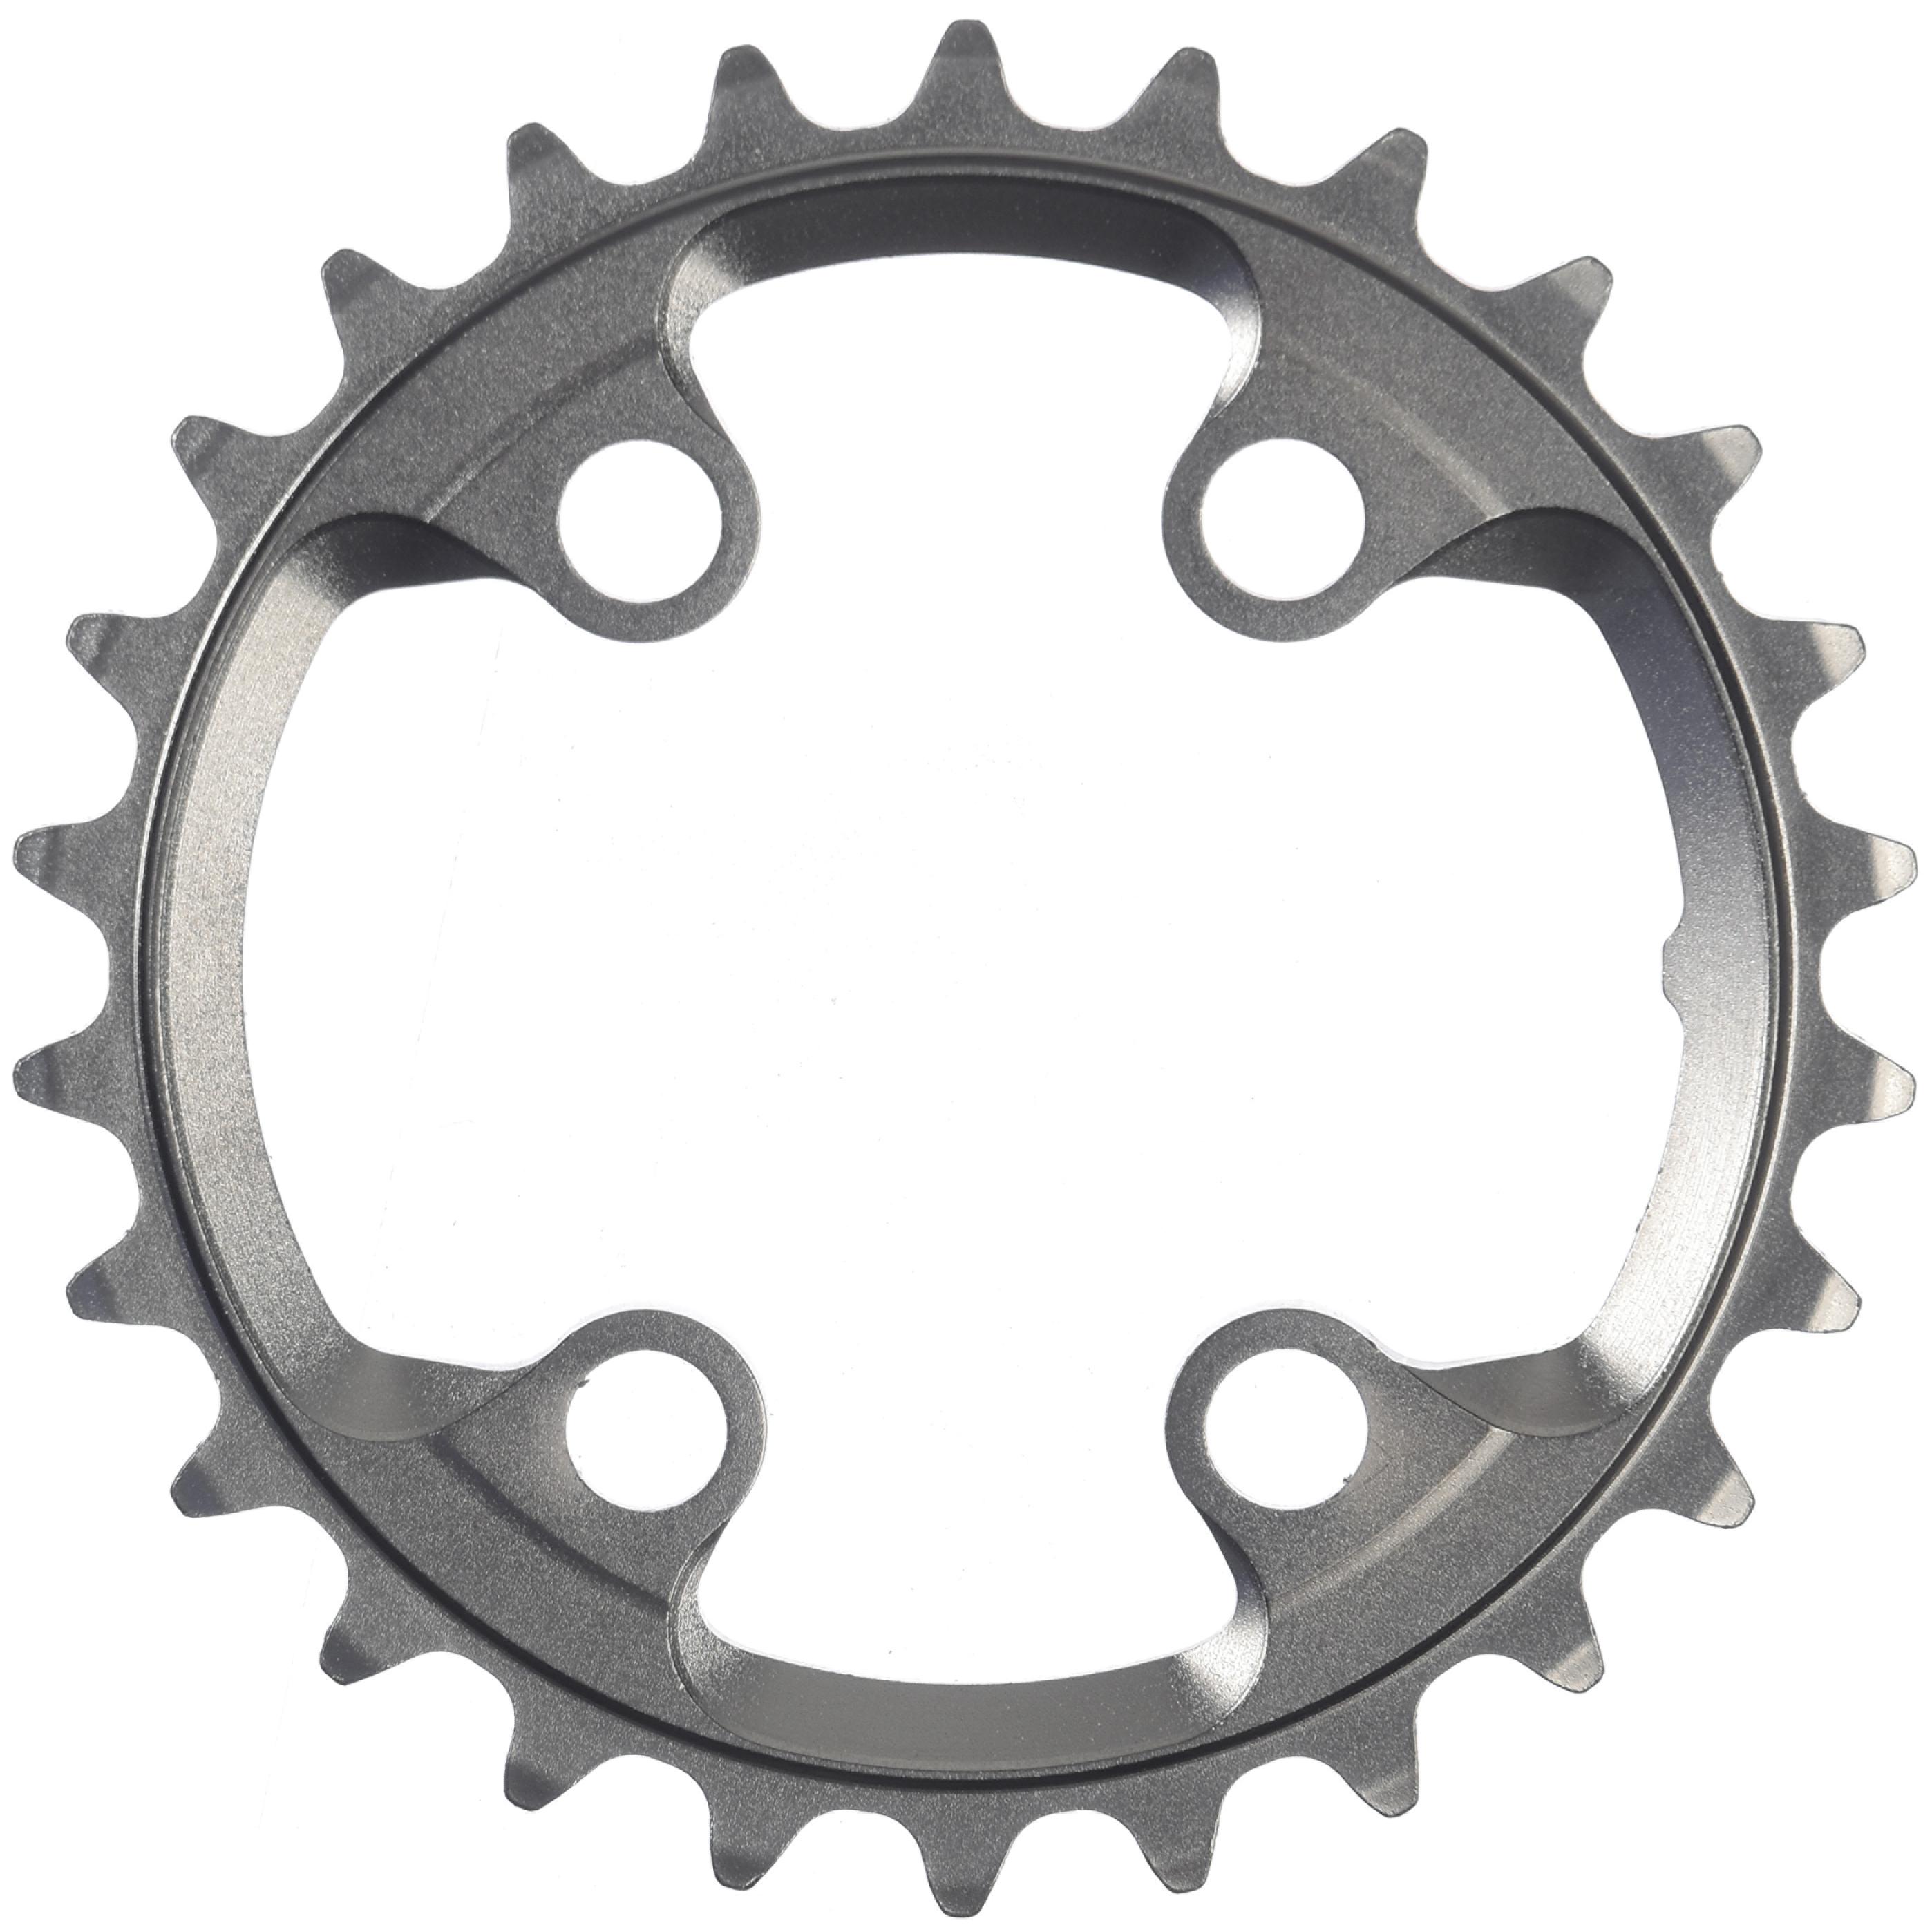 Shimano Xtr Fcm9000-m9020 11sp Double Chainrings - Silver